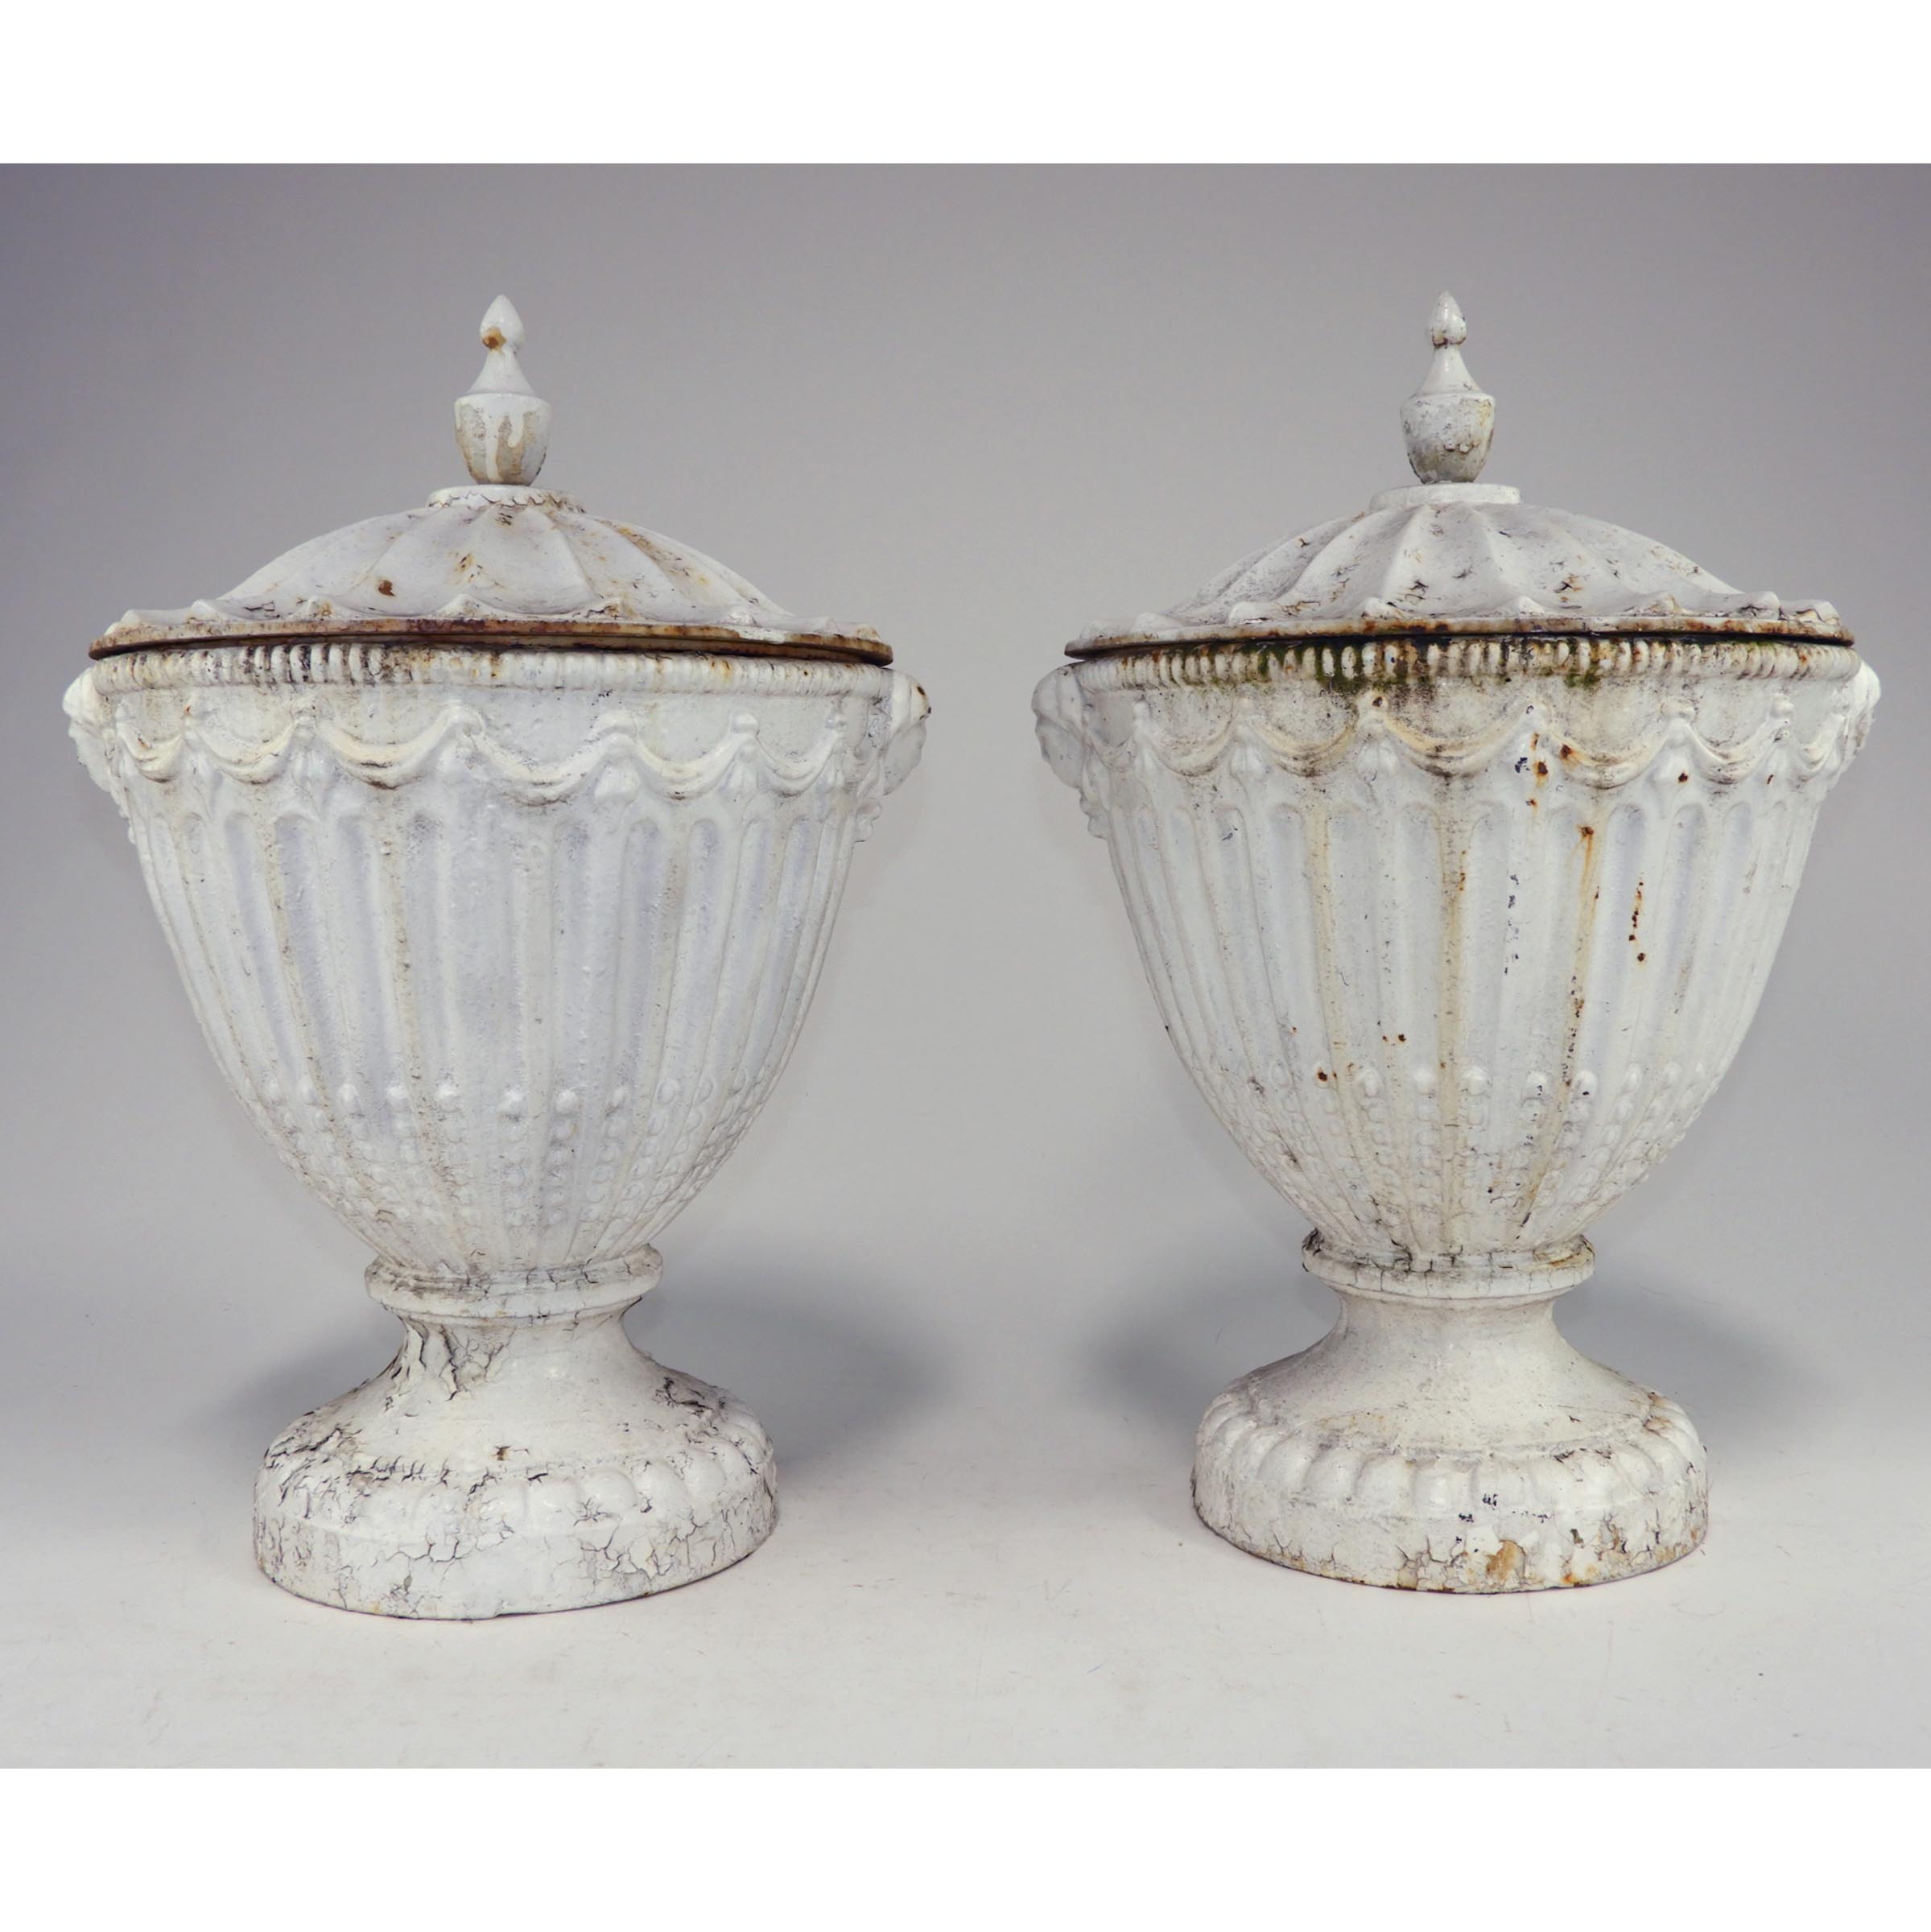 Pair of Adam Style Painted Cast Iron Covered Garden Urns, 20th century